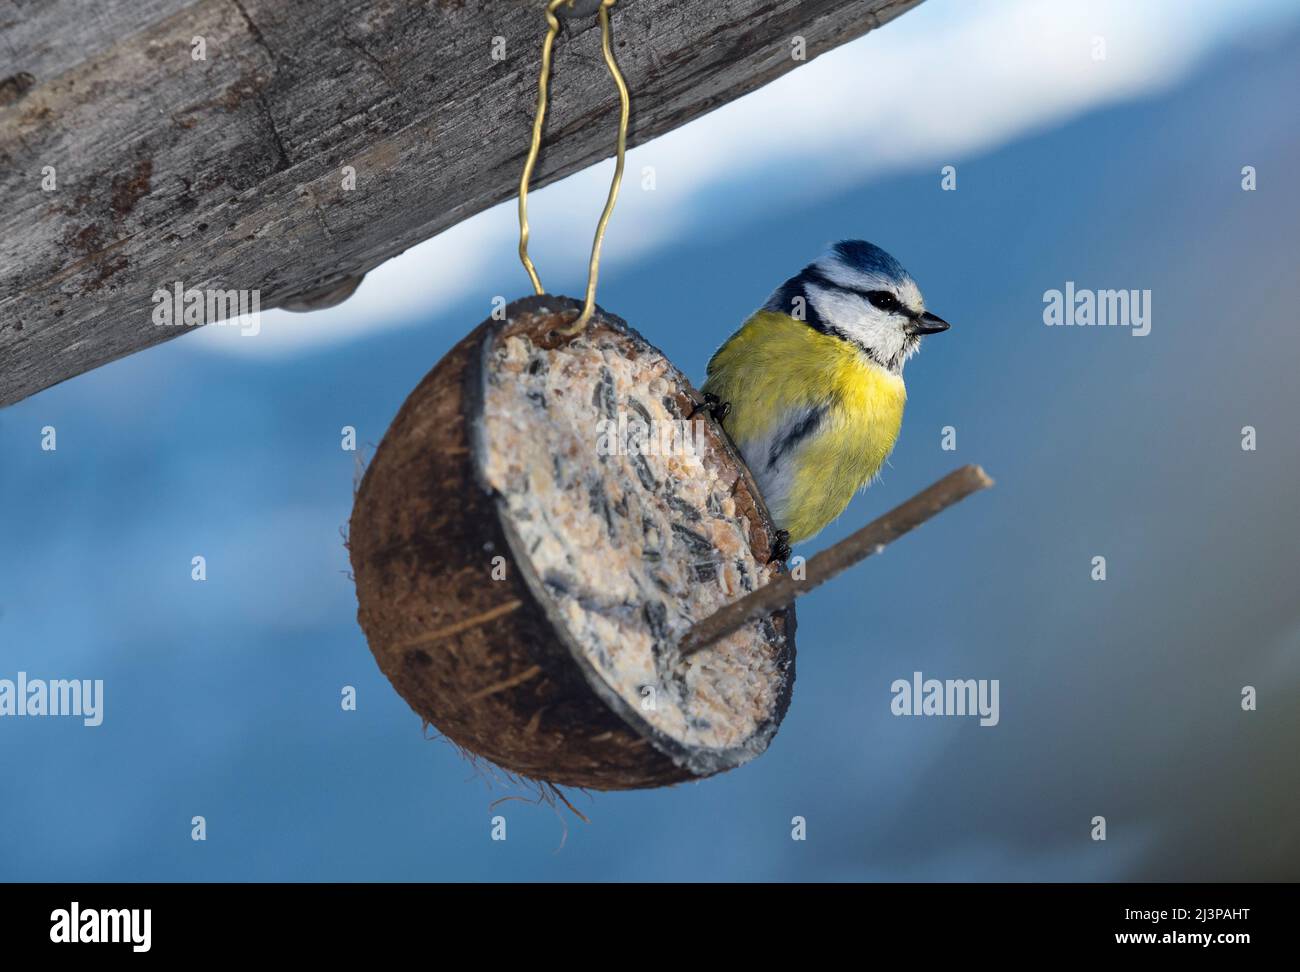 Blue tit (Cyanistes caeruleus) at a bird feeder made of a coconut shell in winter time, Valais, Switzerland Stock Photo